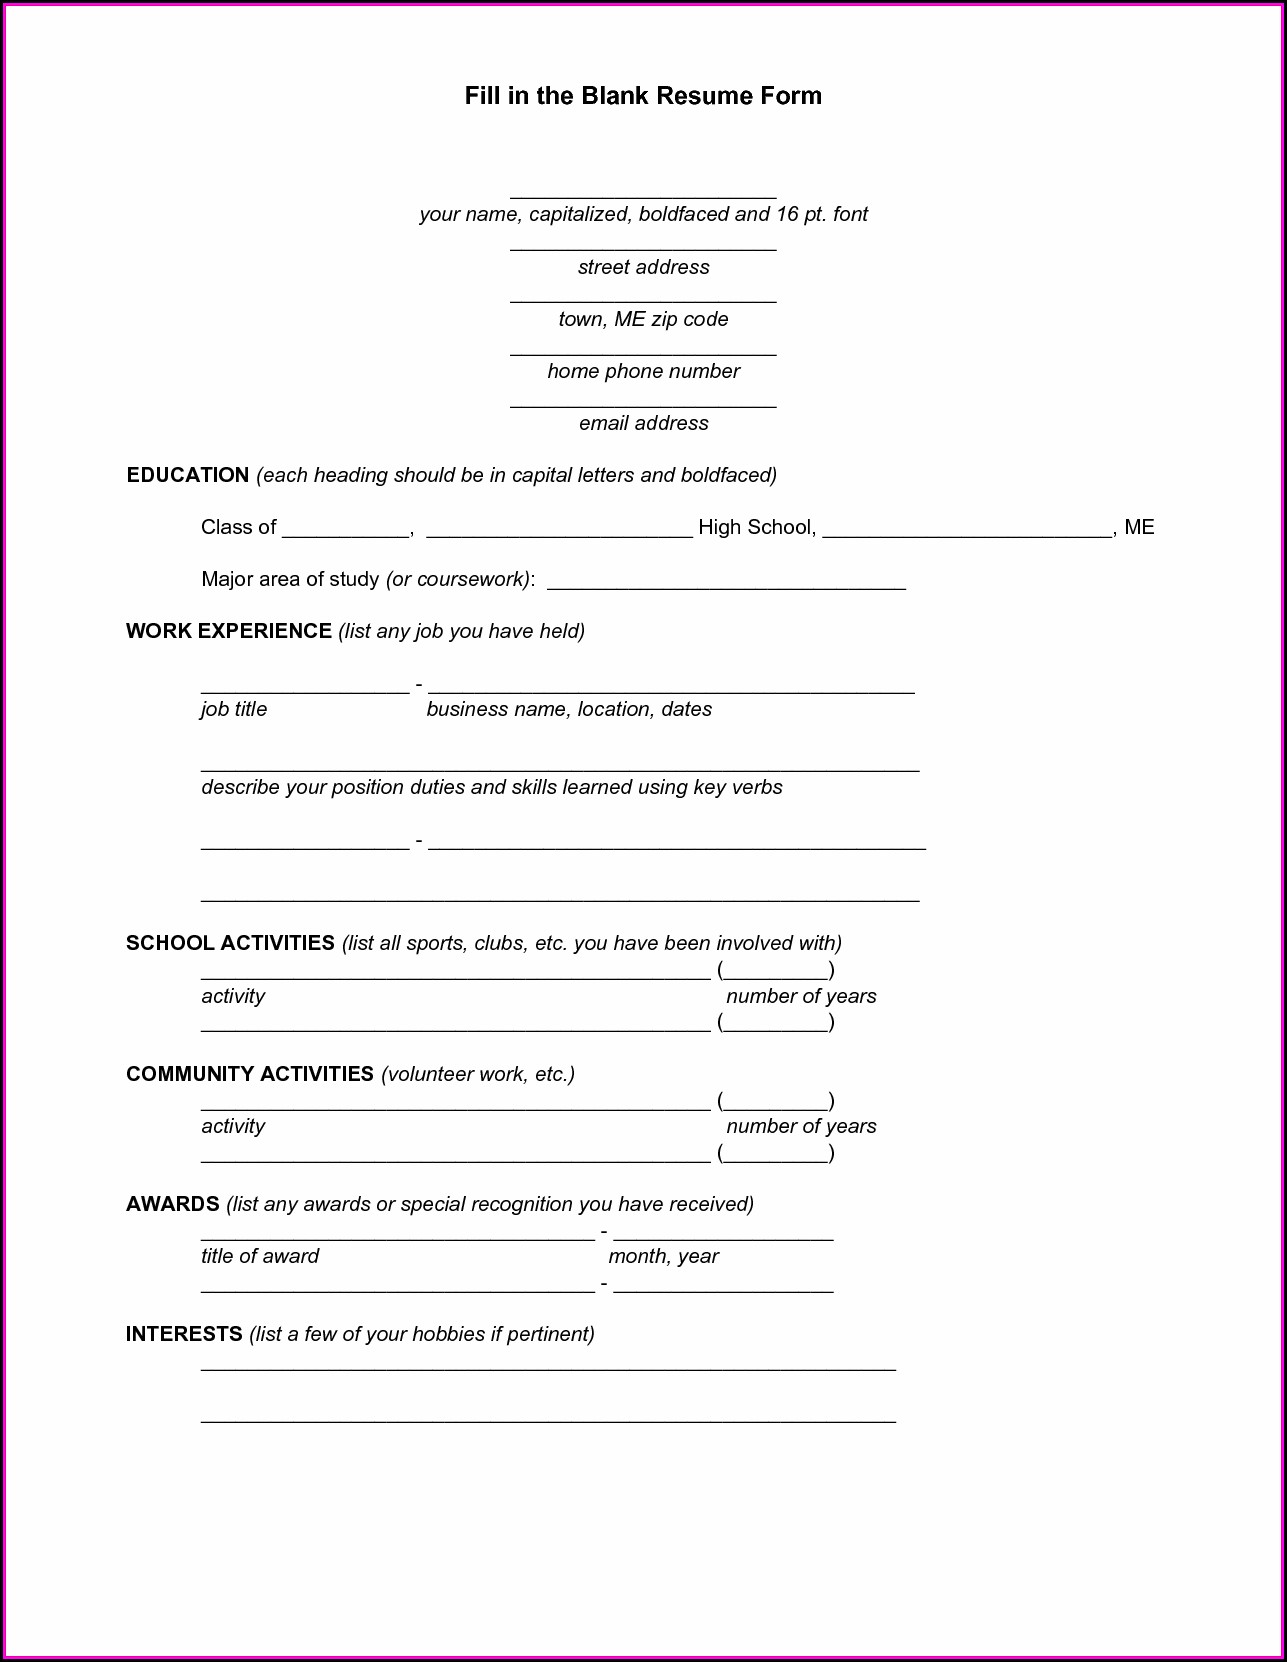 Blank Resume Forms To Fill Out